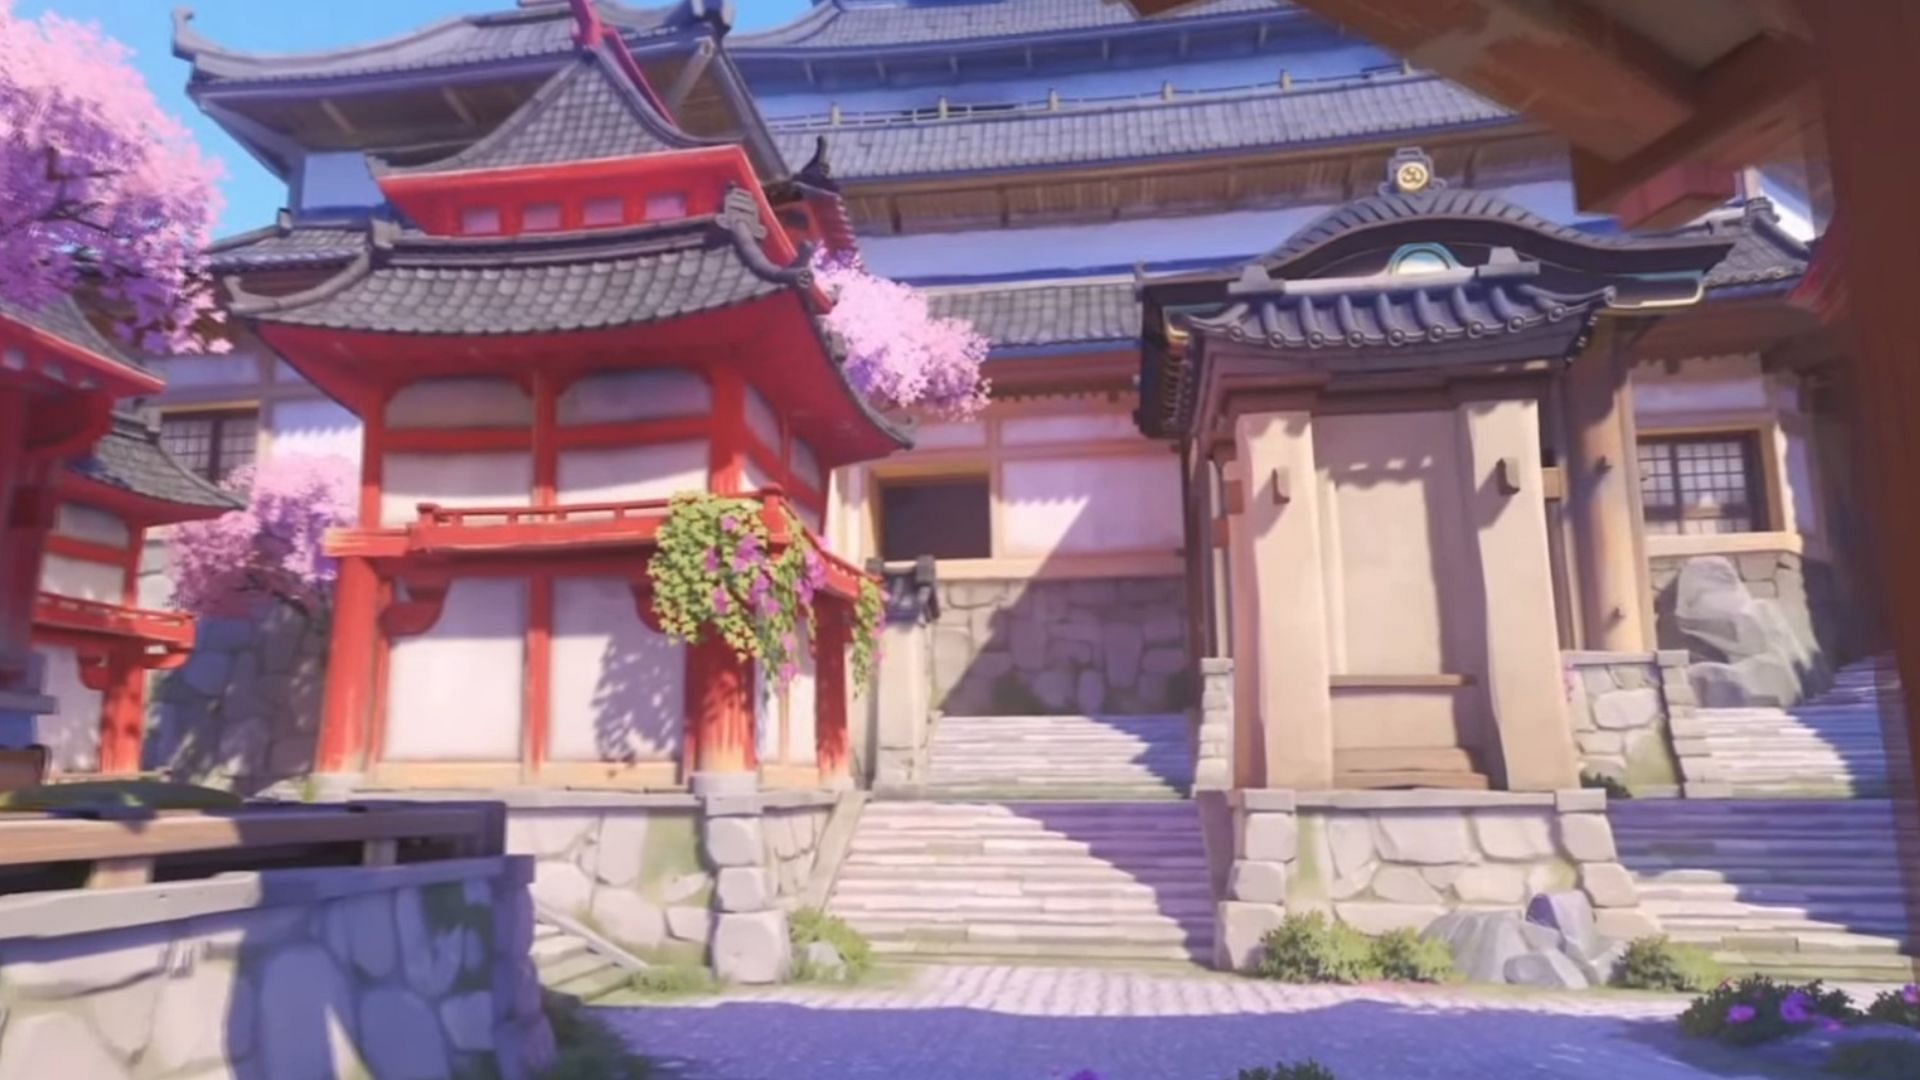 Clash in Overwatch 2 will feature this new map called Hanaoka.